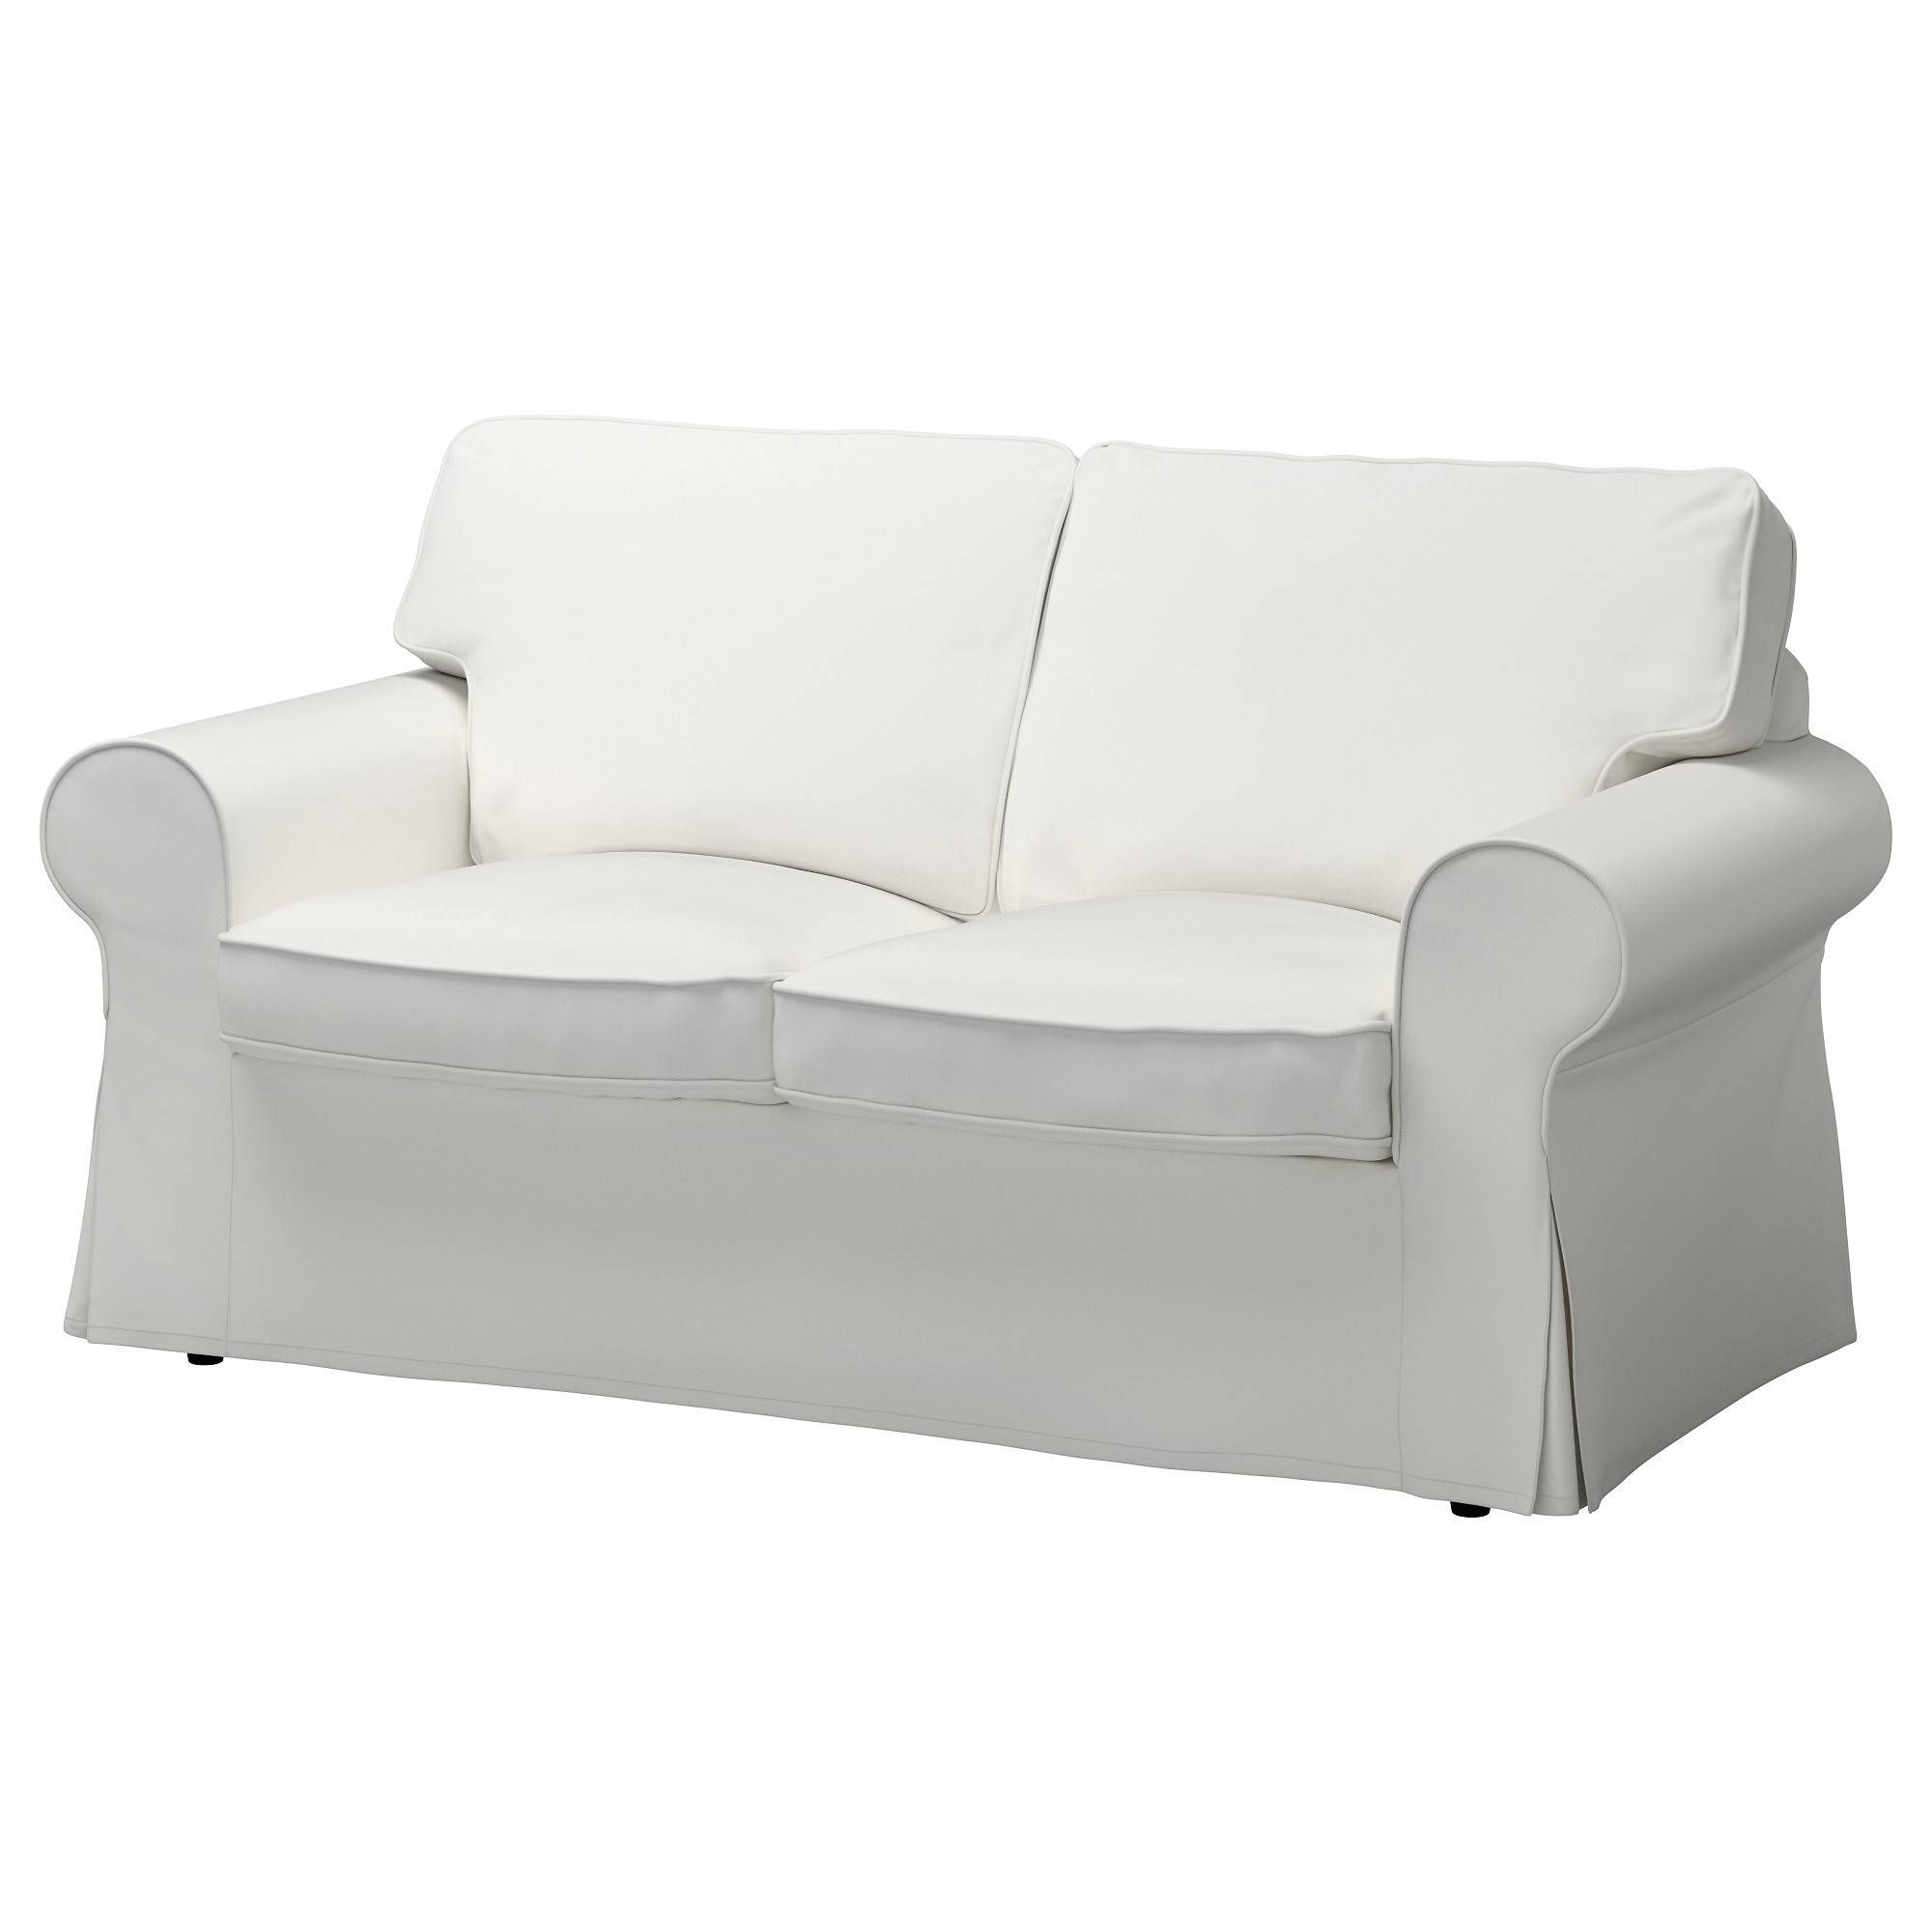 Ektorp Series – Ikea Intended For Wide Sofa Chairs (View 3 of 15)